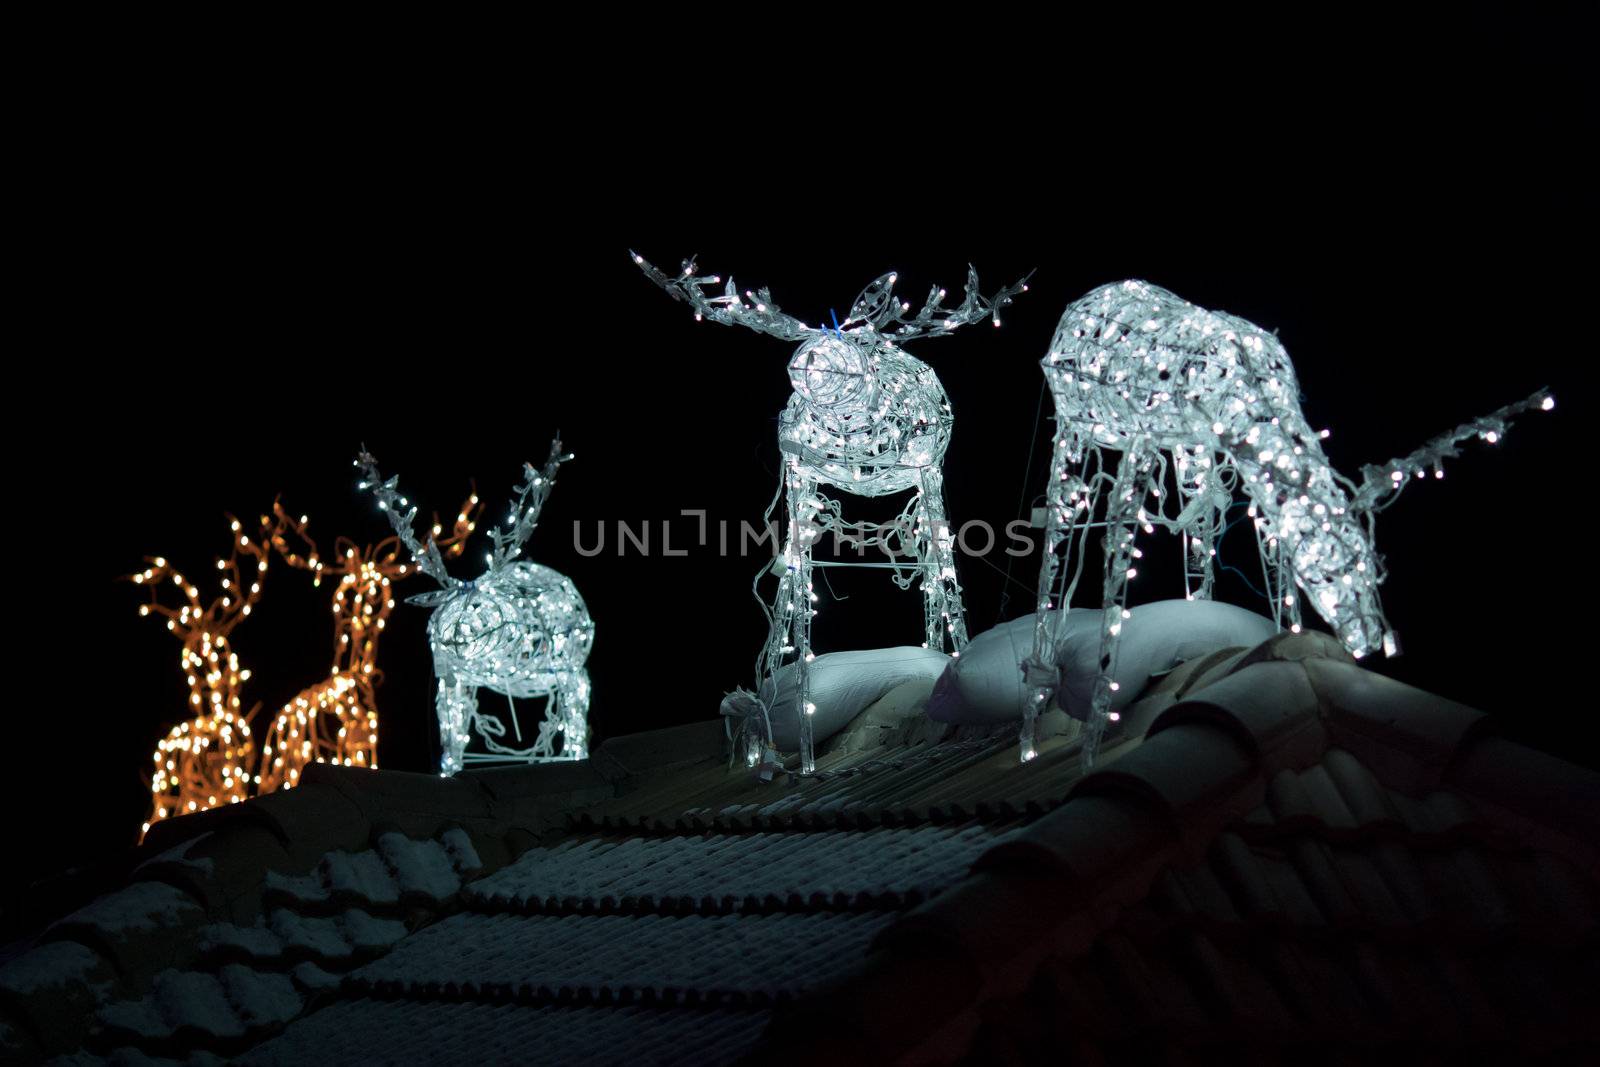 Image of Christmas decoration in the form of reindeers at night